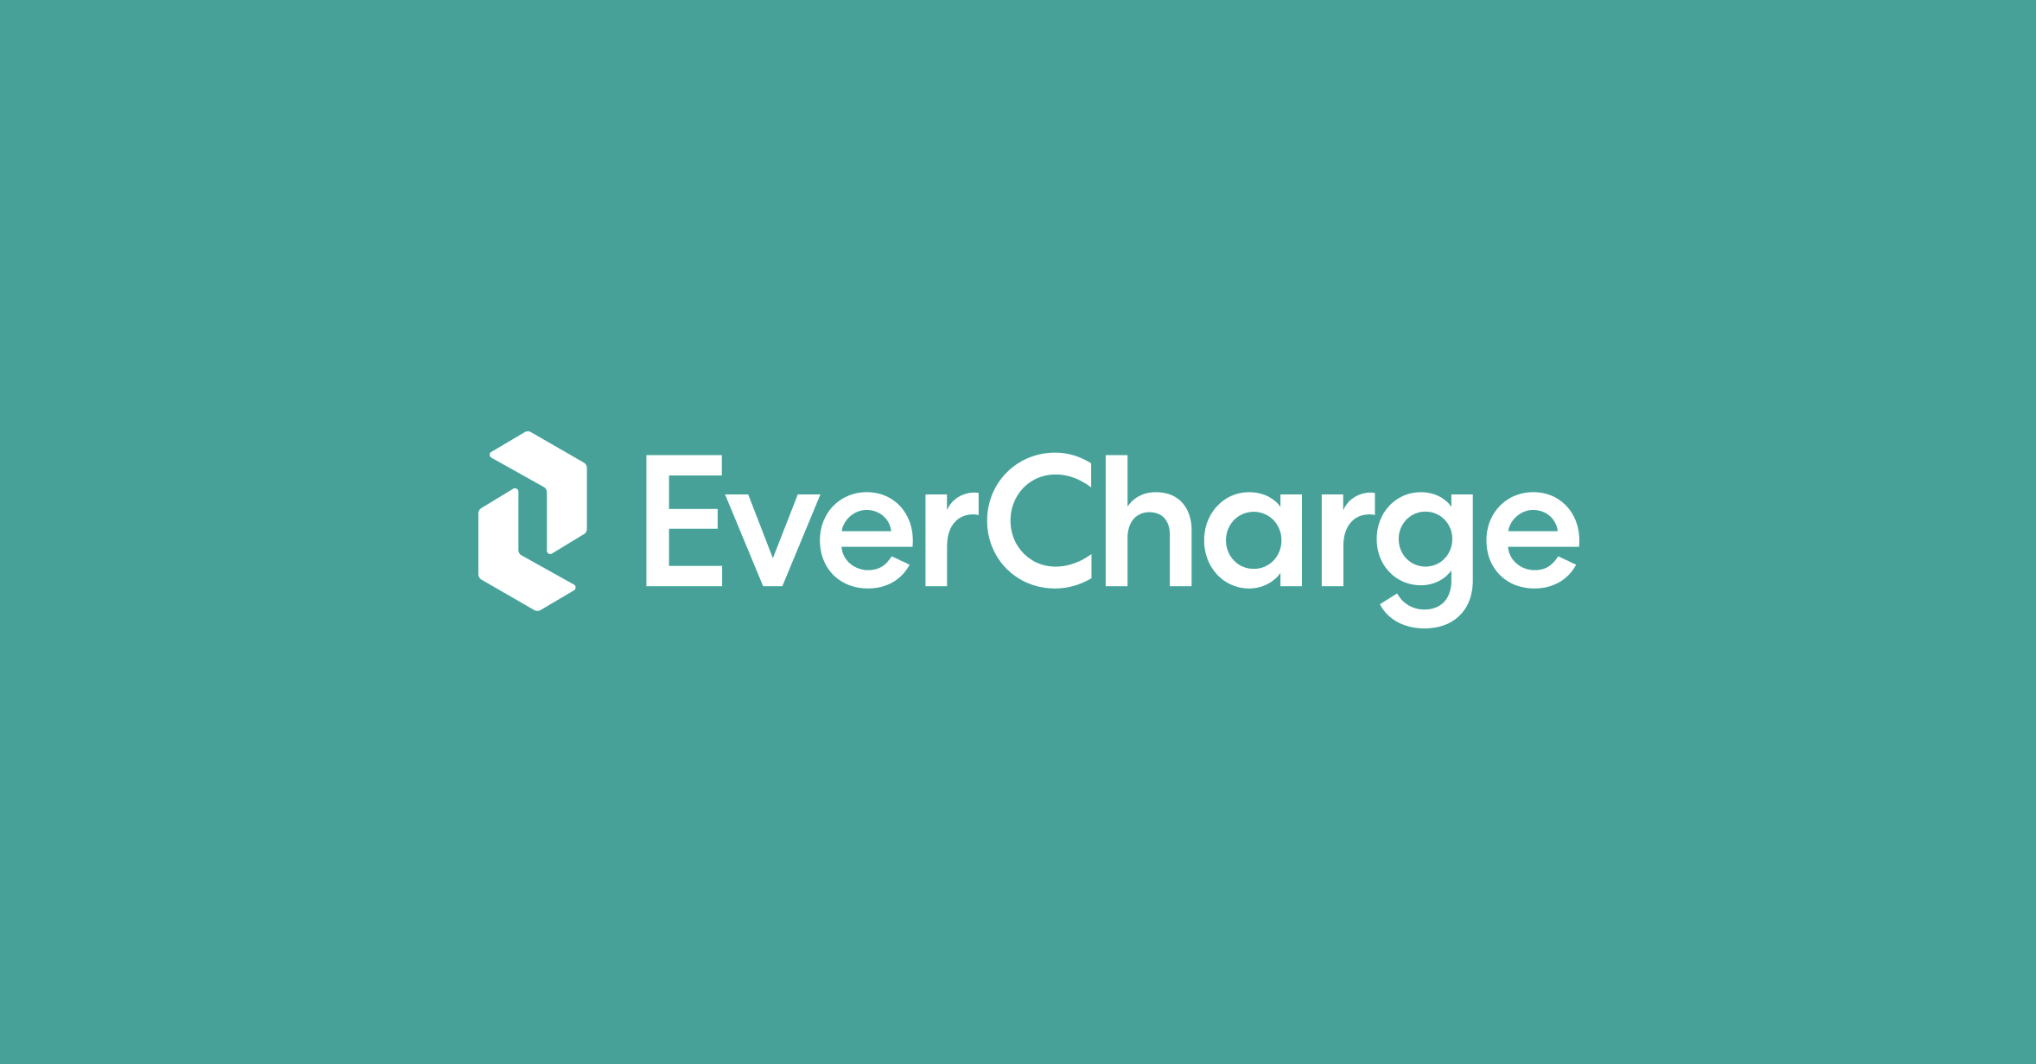 EverCharge Announces Expansion of Fleet Portfolio Offerings to Provide an Integrated EV Charging Experience